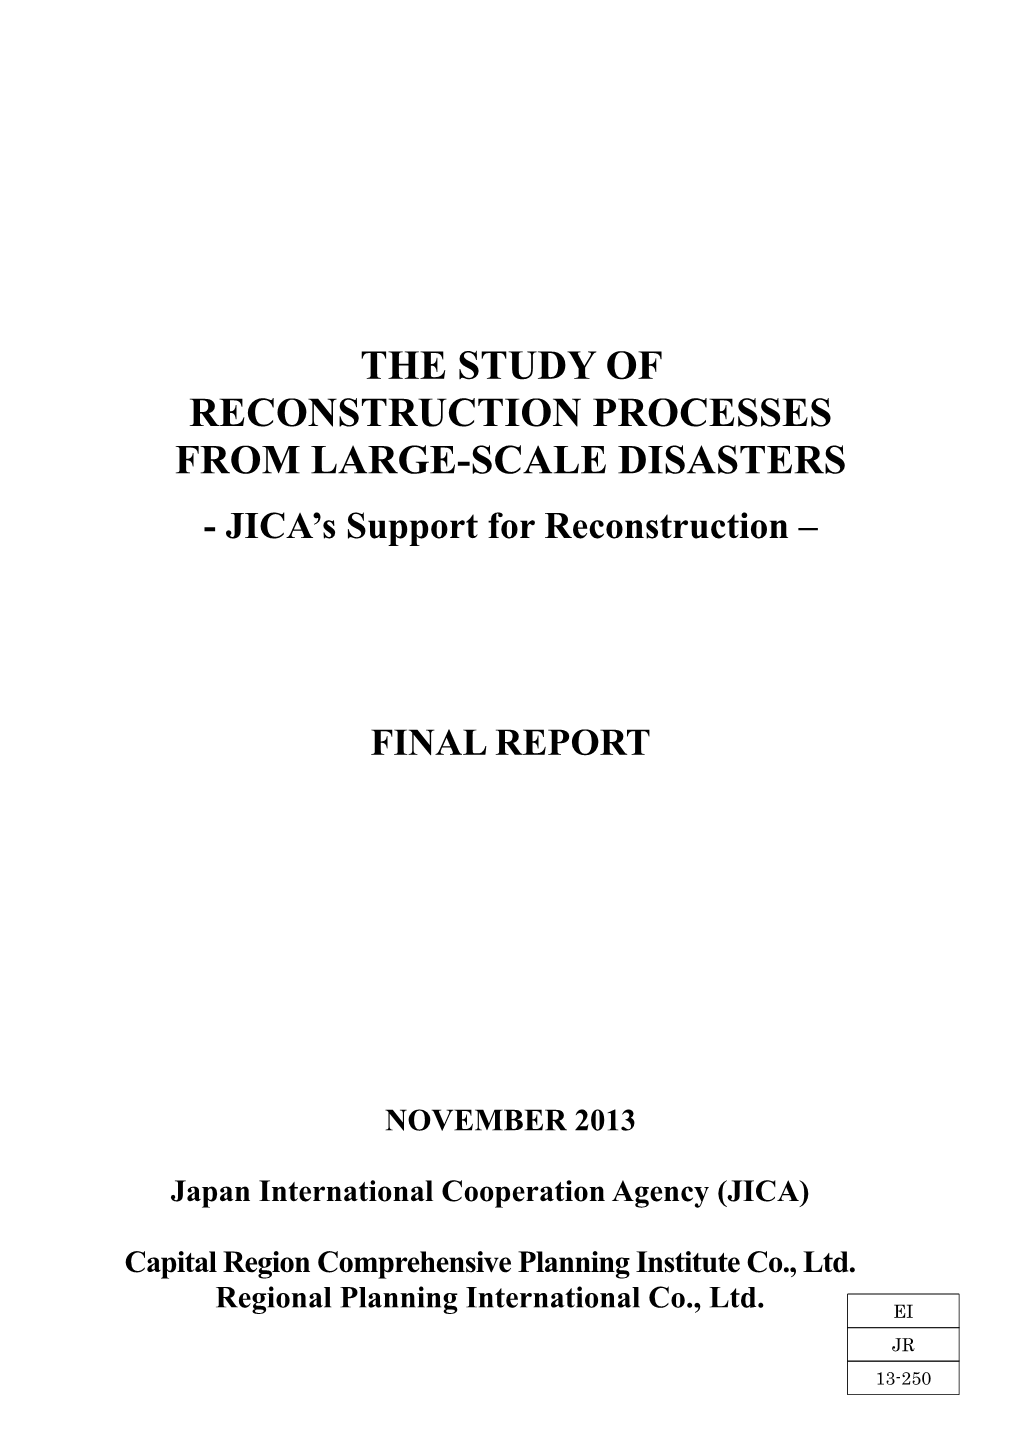 The Study of Reconstruction Processes from Large-Scale Disasters